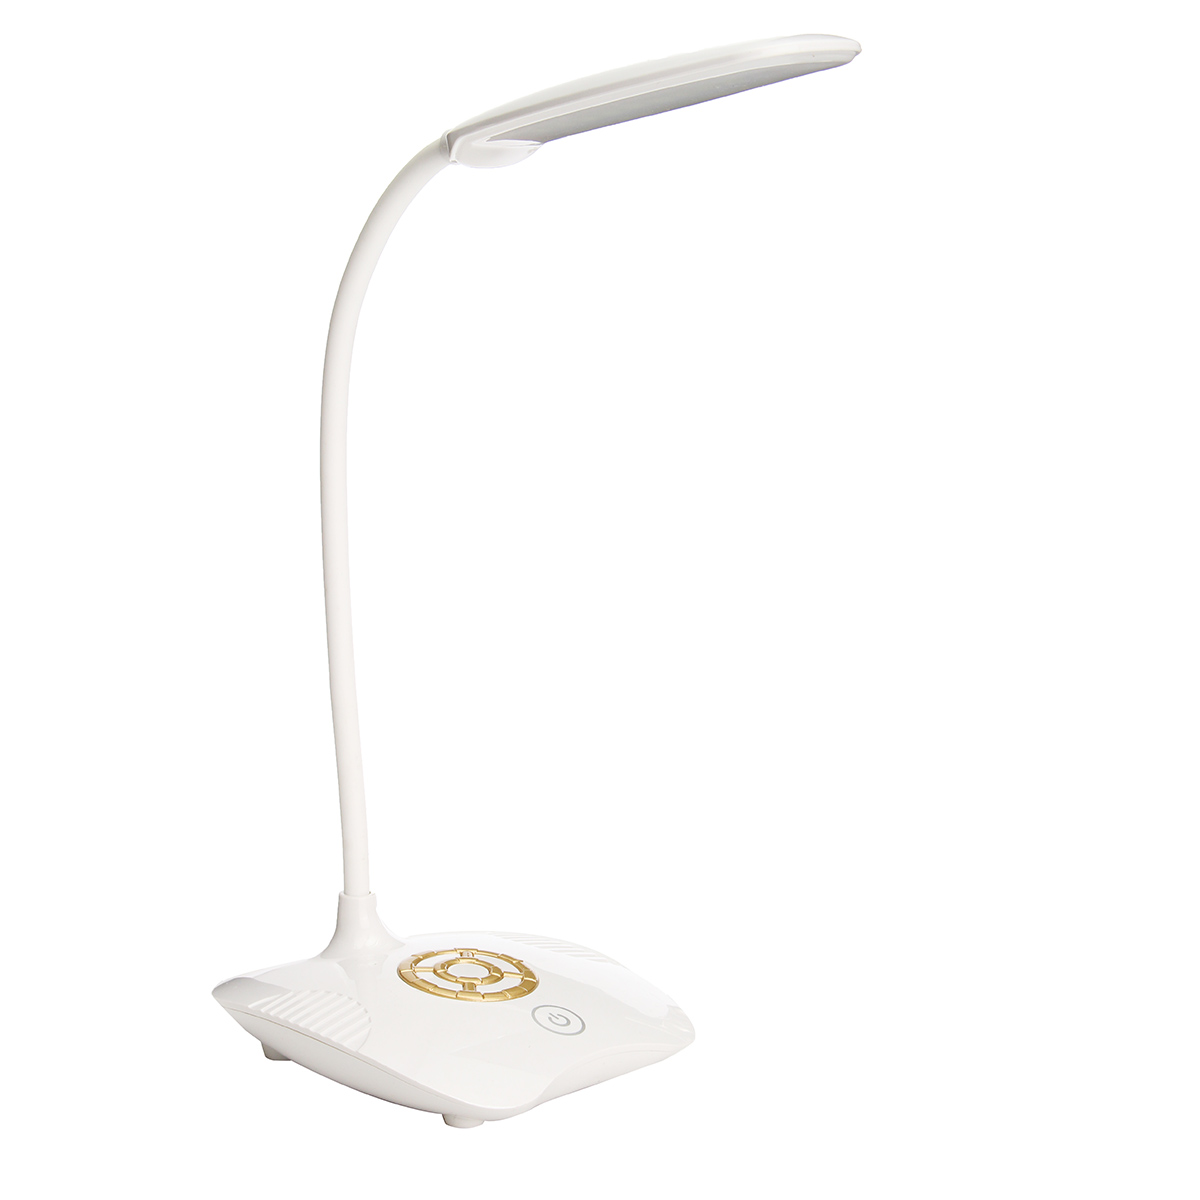 Flexible-Rechargeable-Dimmable-USB-LED-Night-Light-Bedside-Desktop-Reading-Table-Lamp-1118136-4